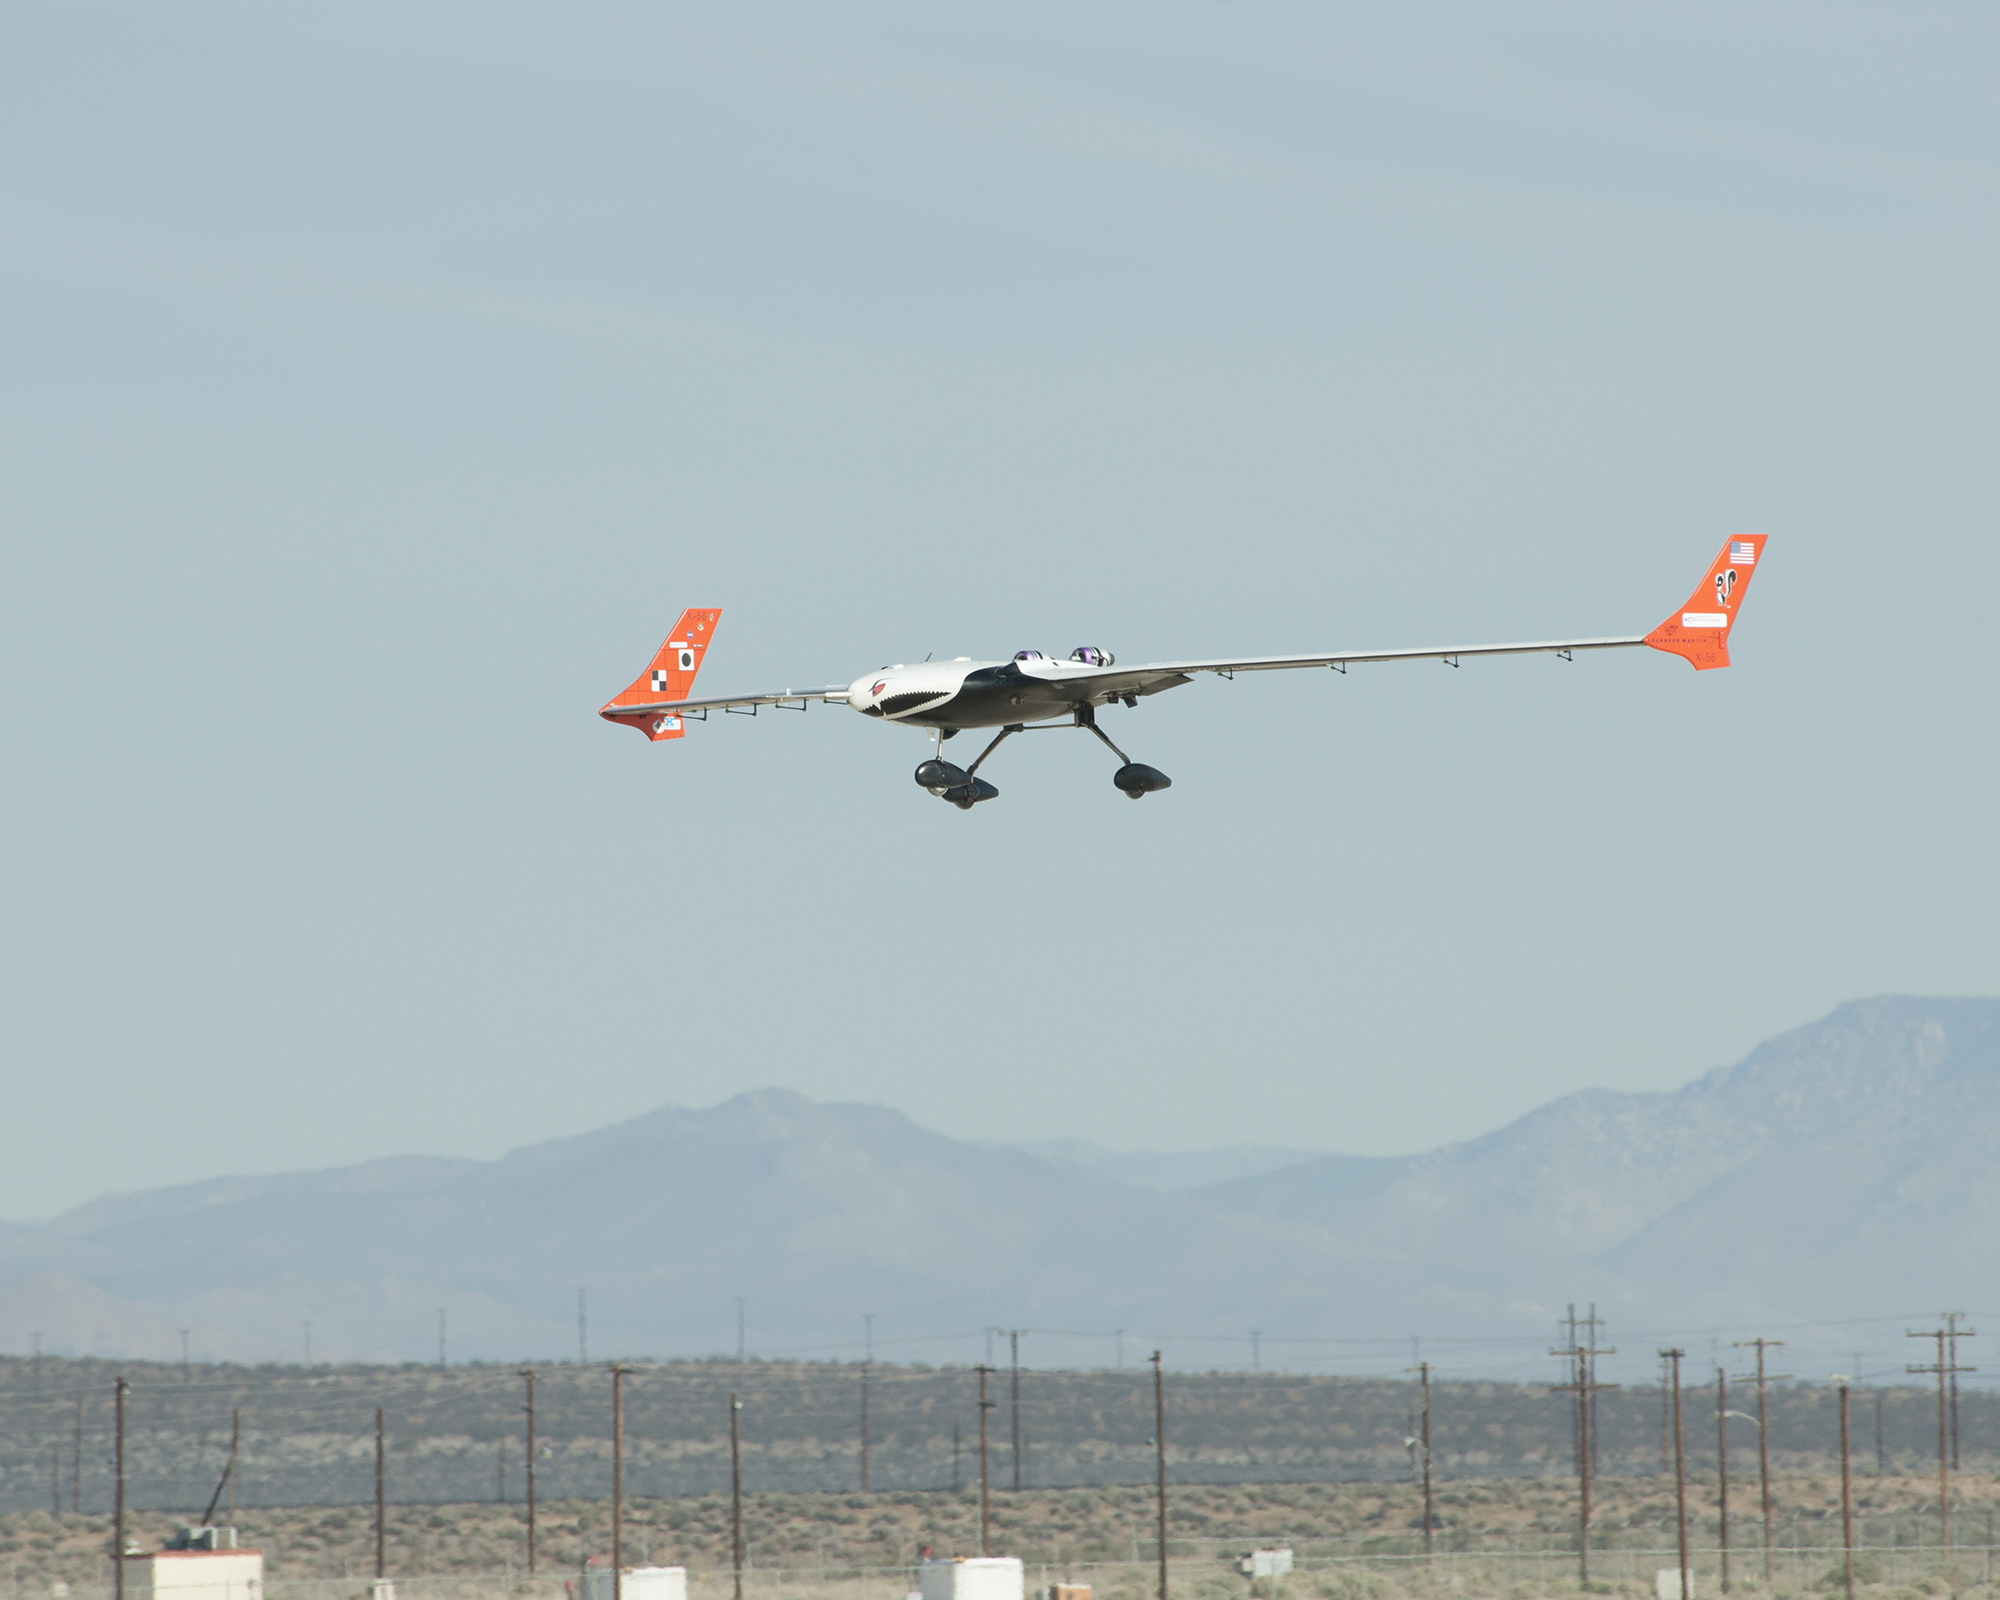 NASA researchers are using the X-56A, a low-cost, modular, remotely piloted aerial vehicle.